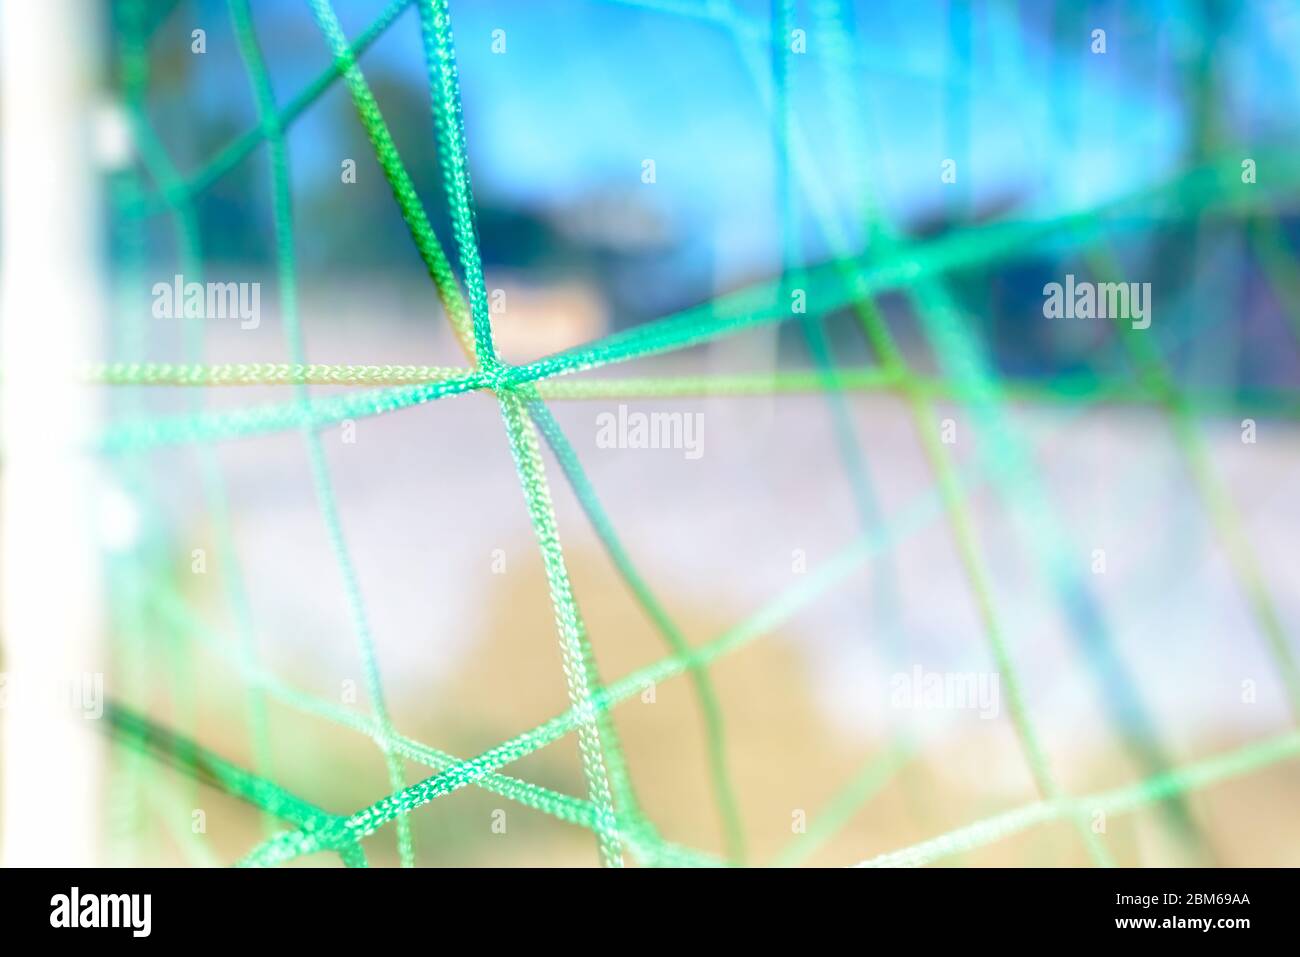 Double exposure of goal net merging together in cross patterns Stock Photo